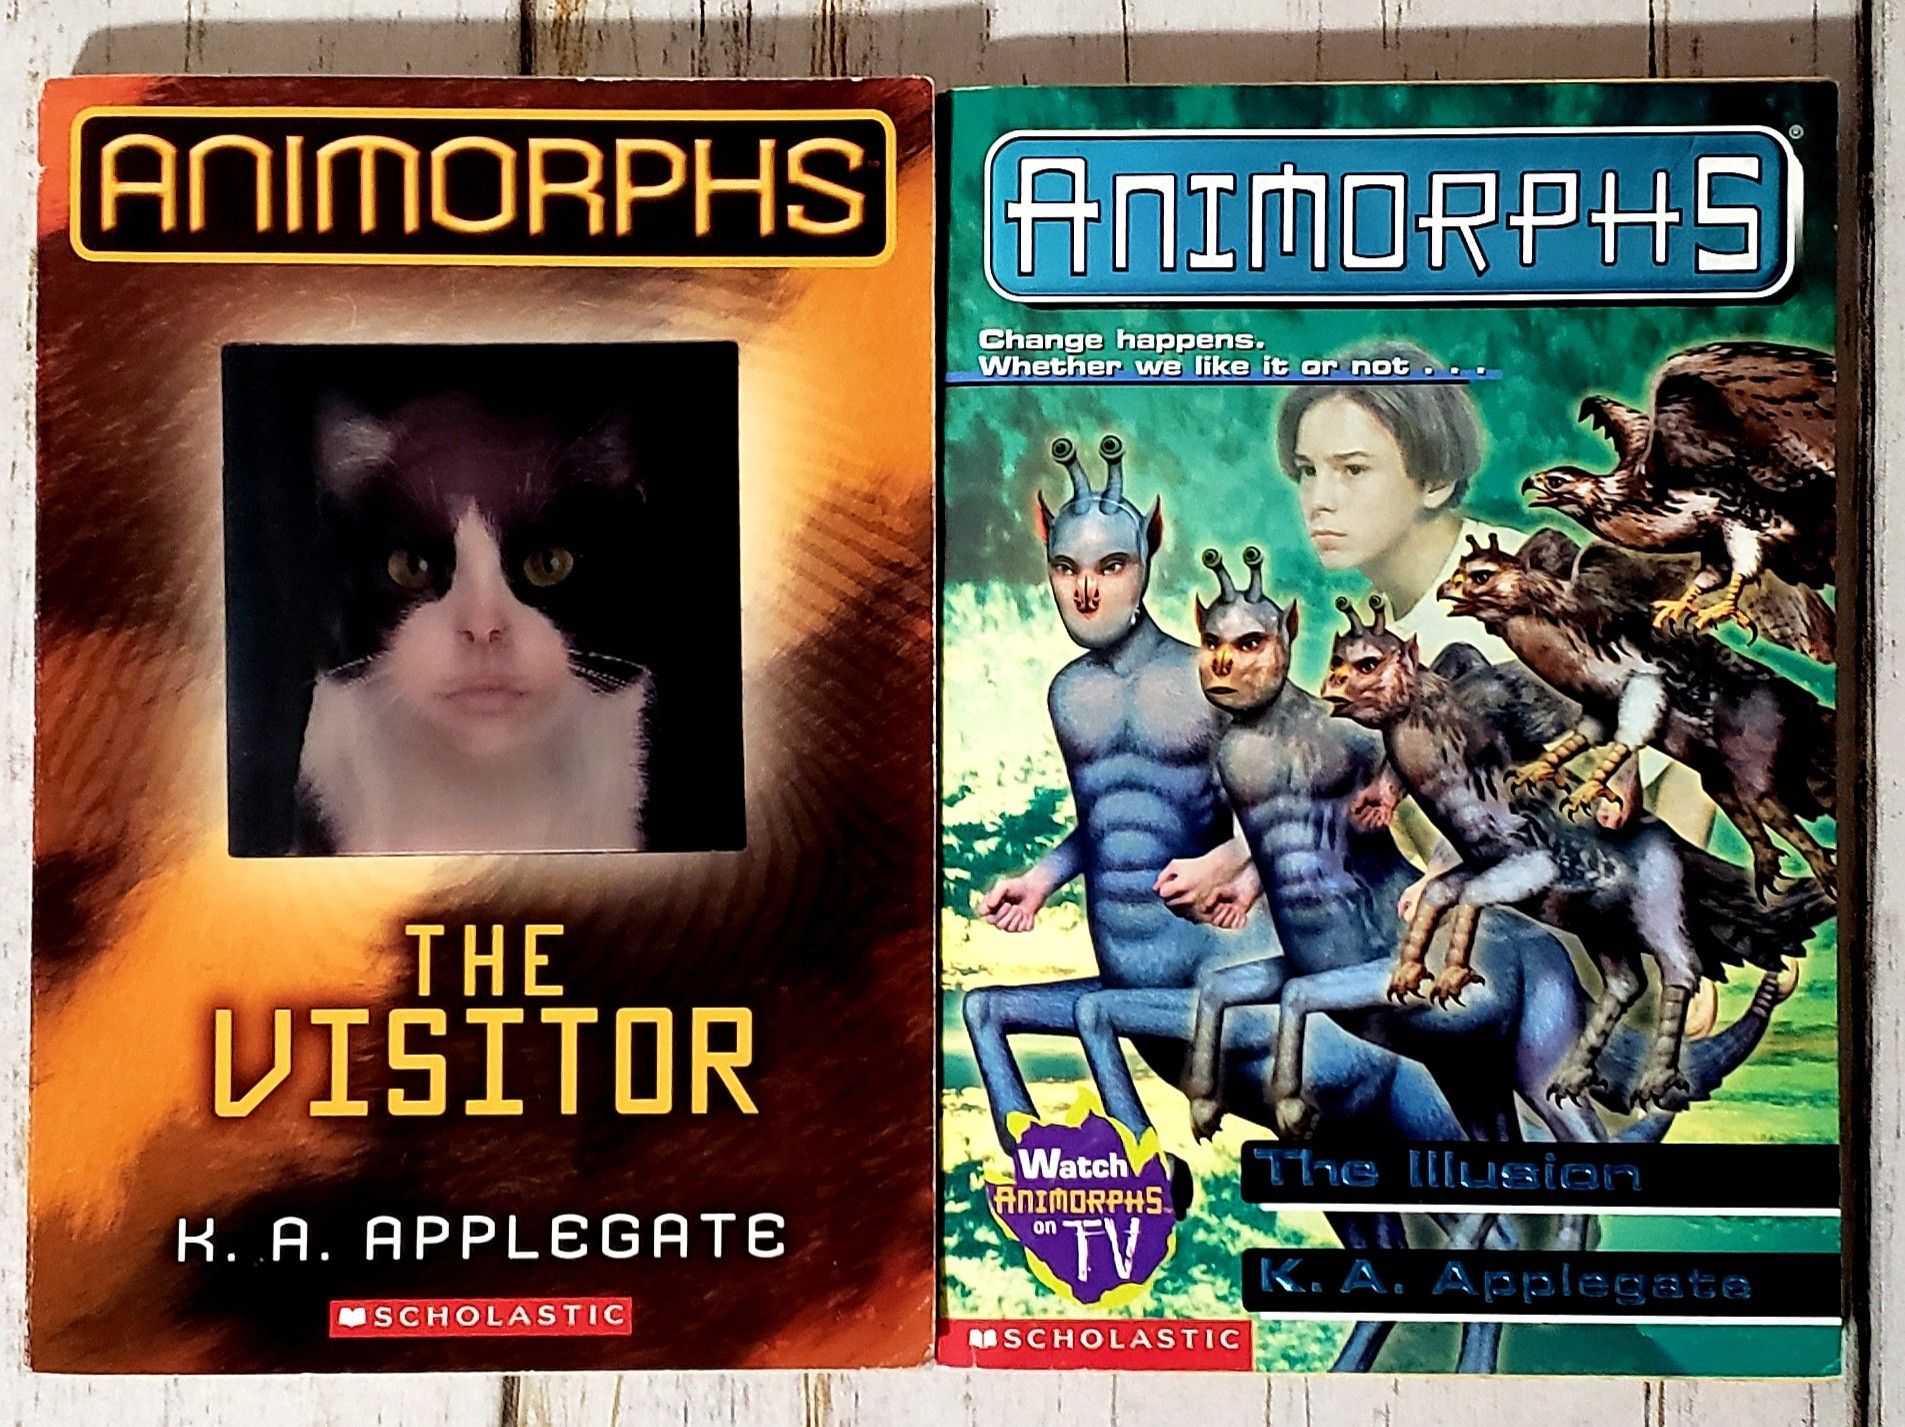 ANIMORPHS Lot of 2 Books by K.A. Applegate The Visitors #2, 33 Scholastic